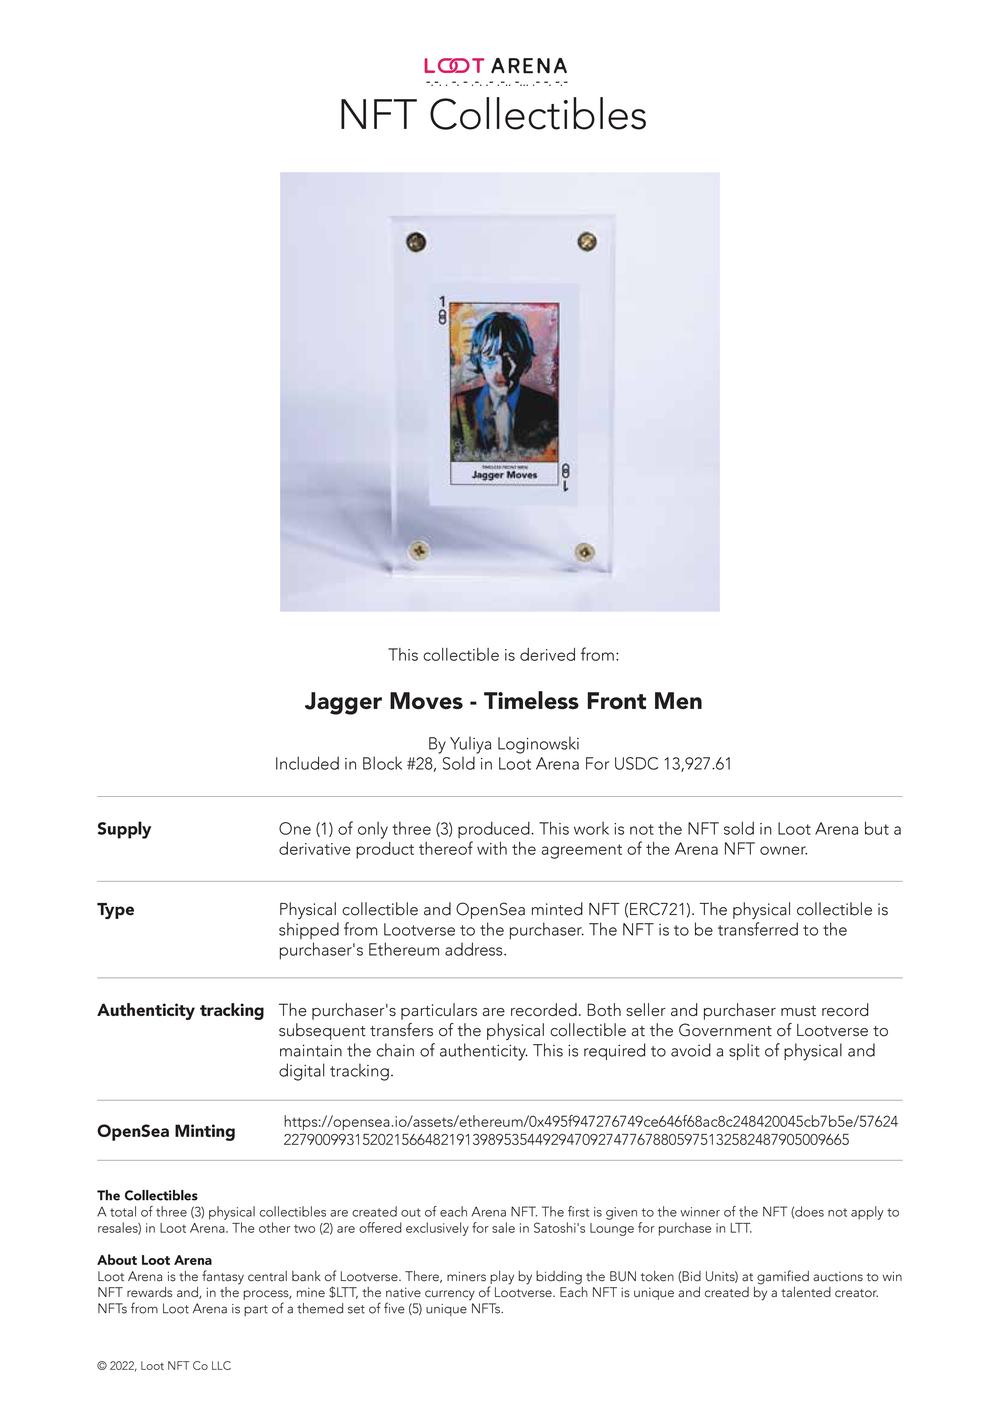 Jagger Moves_#1 Collectible_Contract.pdf